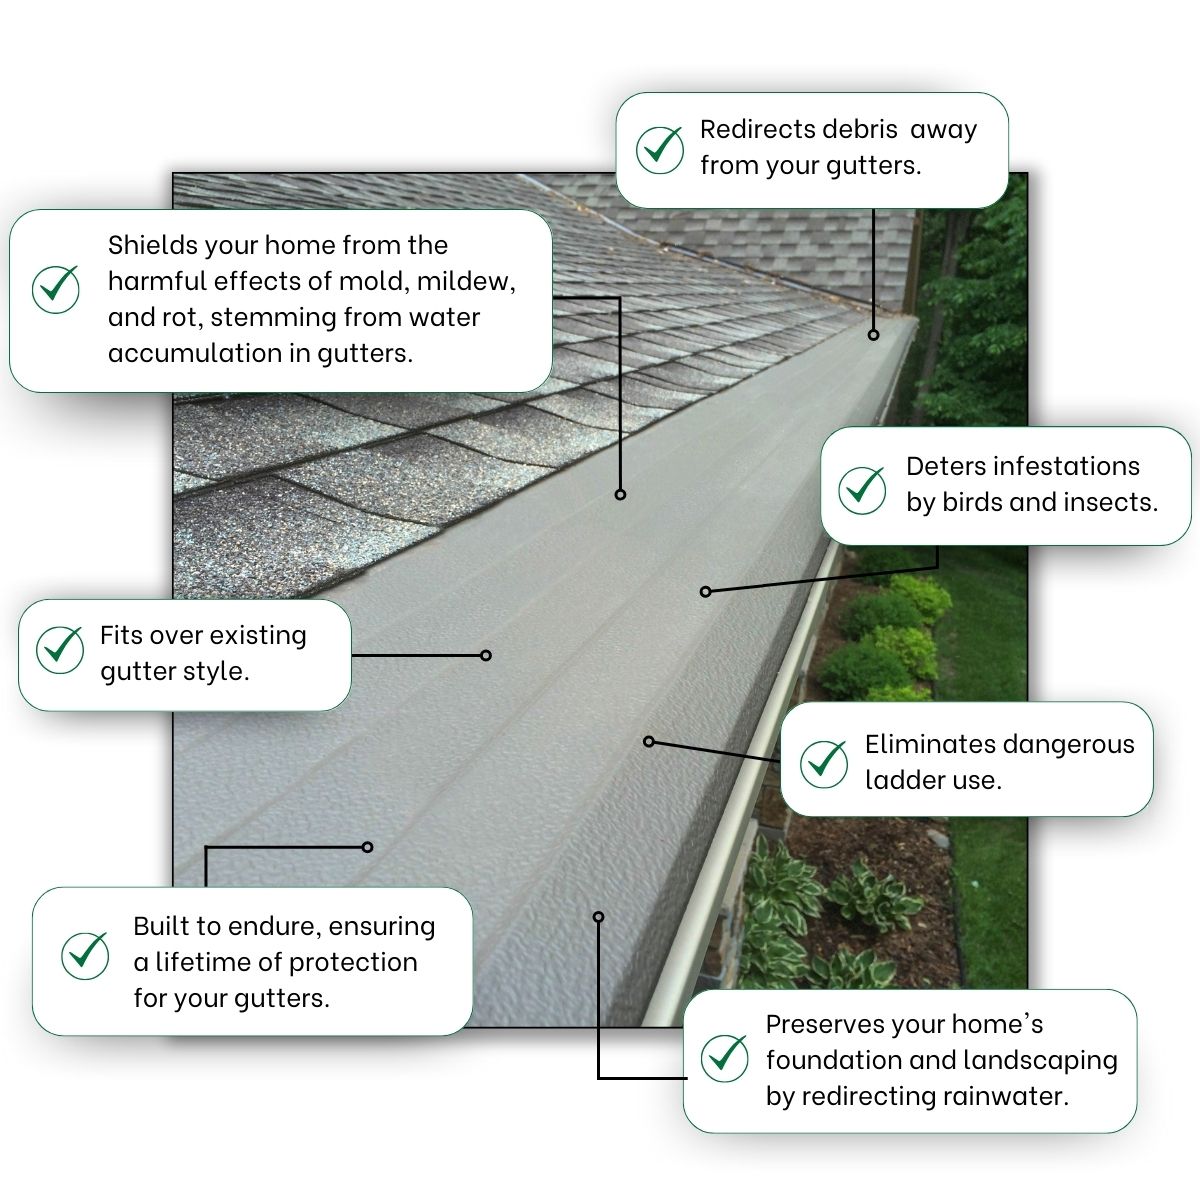 Gutter Helmet is a type of gutter guard that provides the best protection for your gutters & sold by Rain Guard Inc.